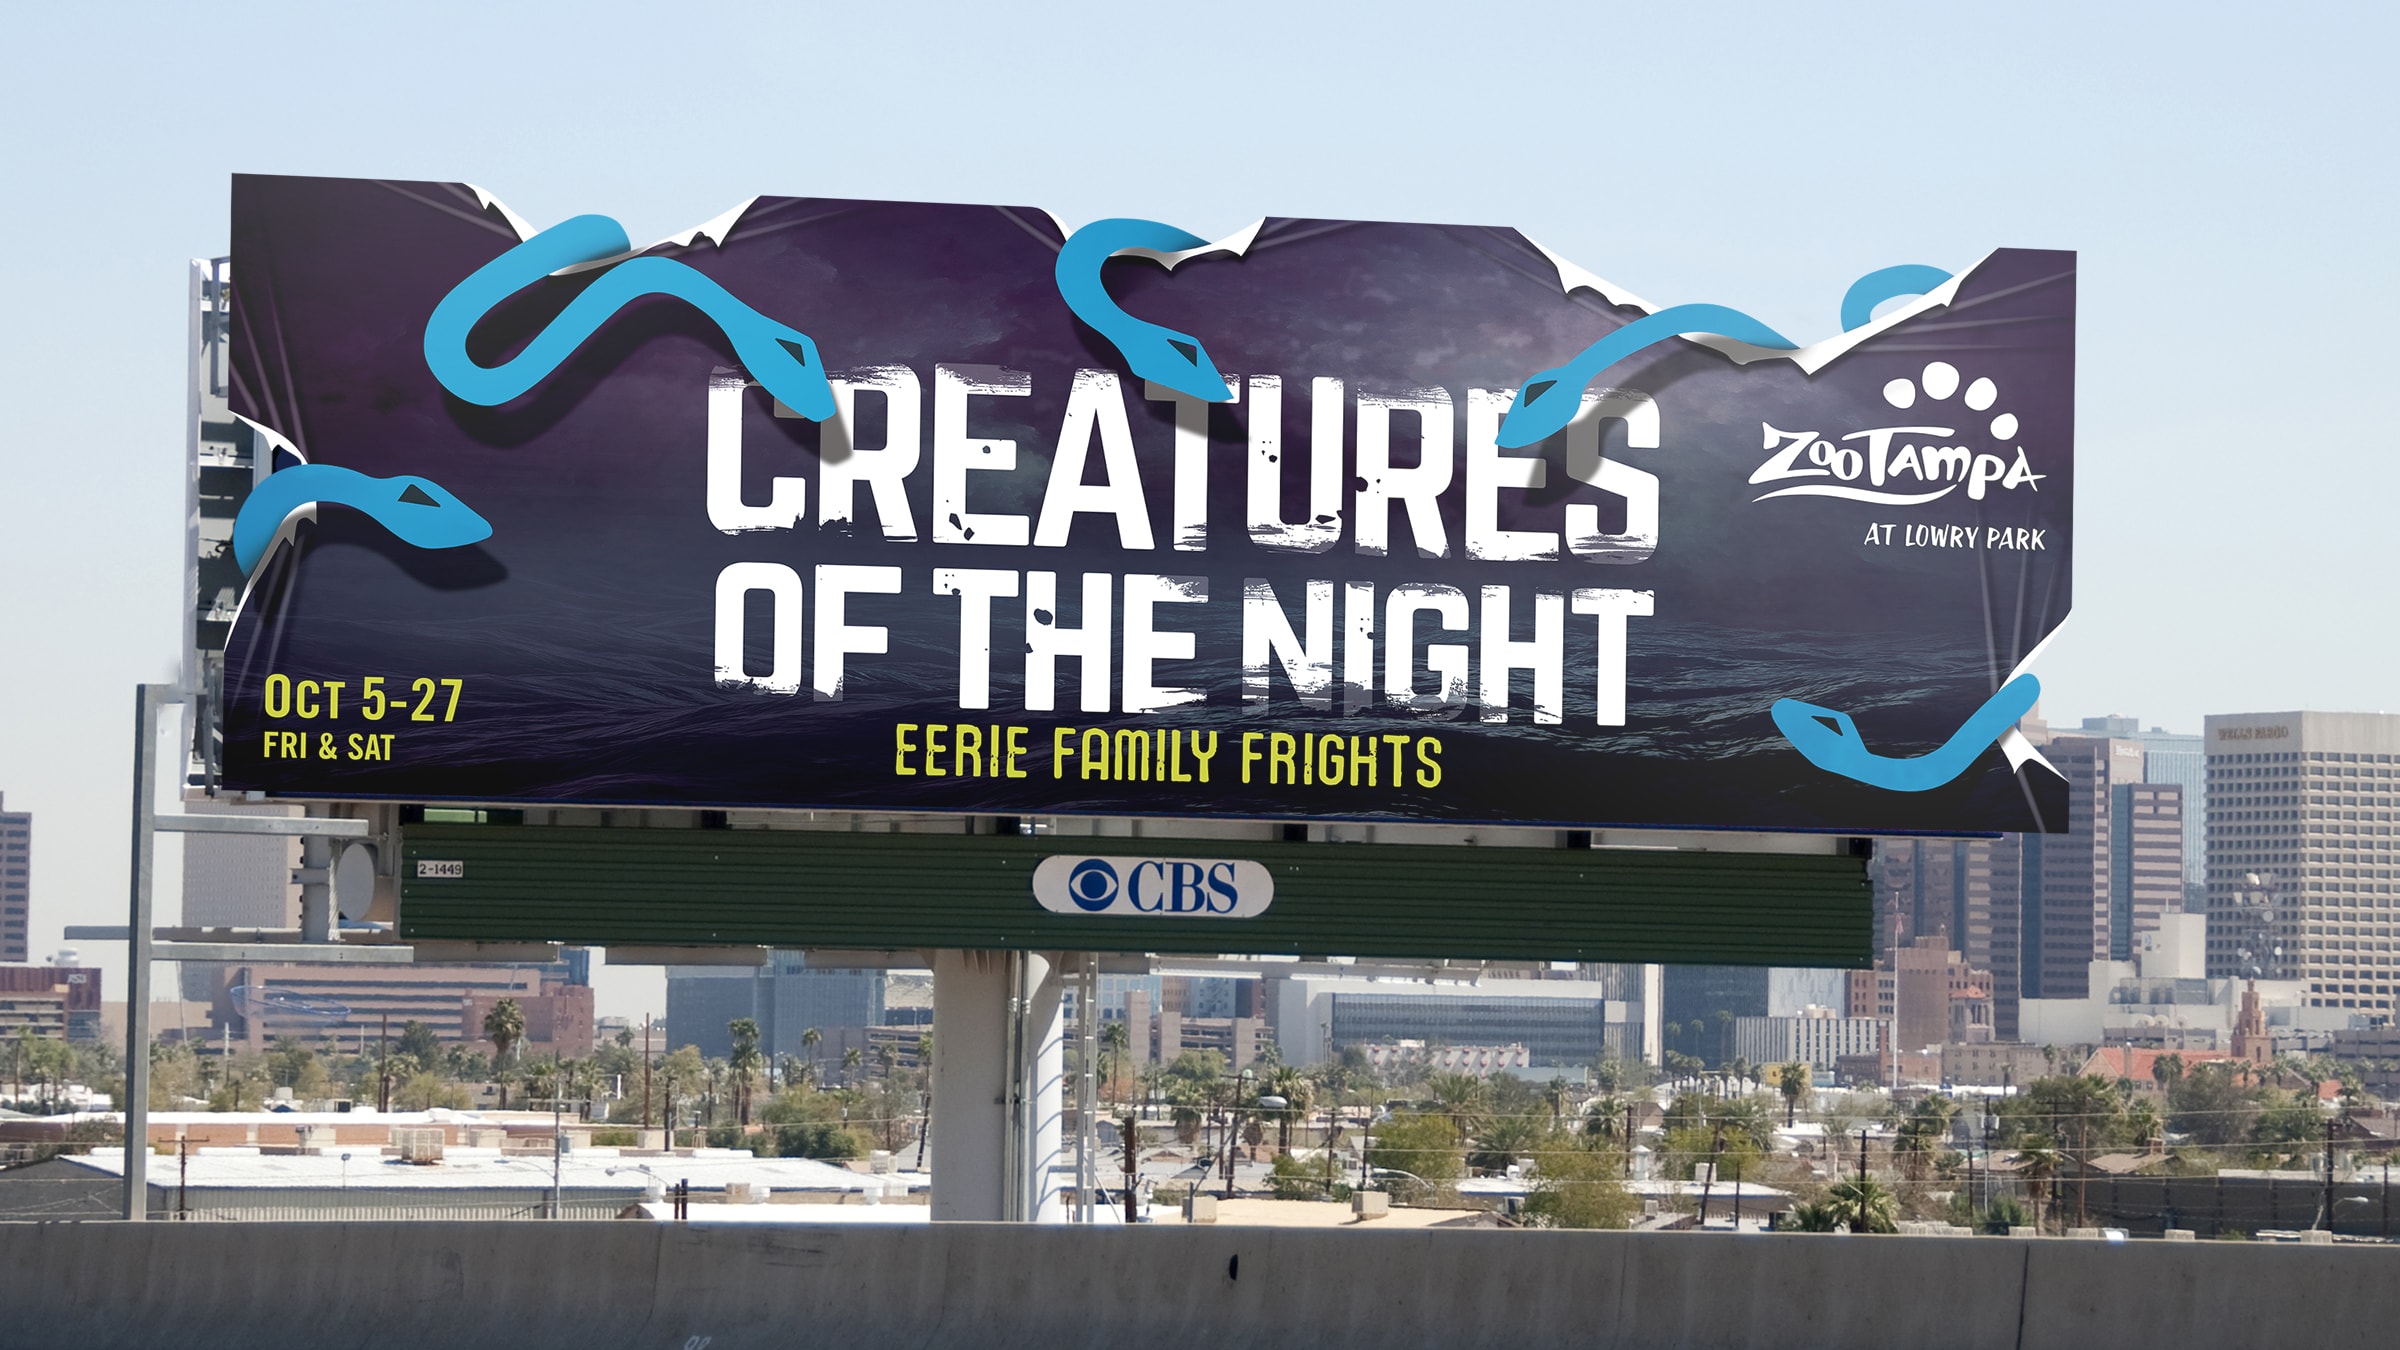 Medusa-themed Creature of the Night billboard for ZooTampa